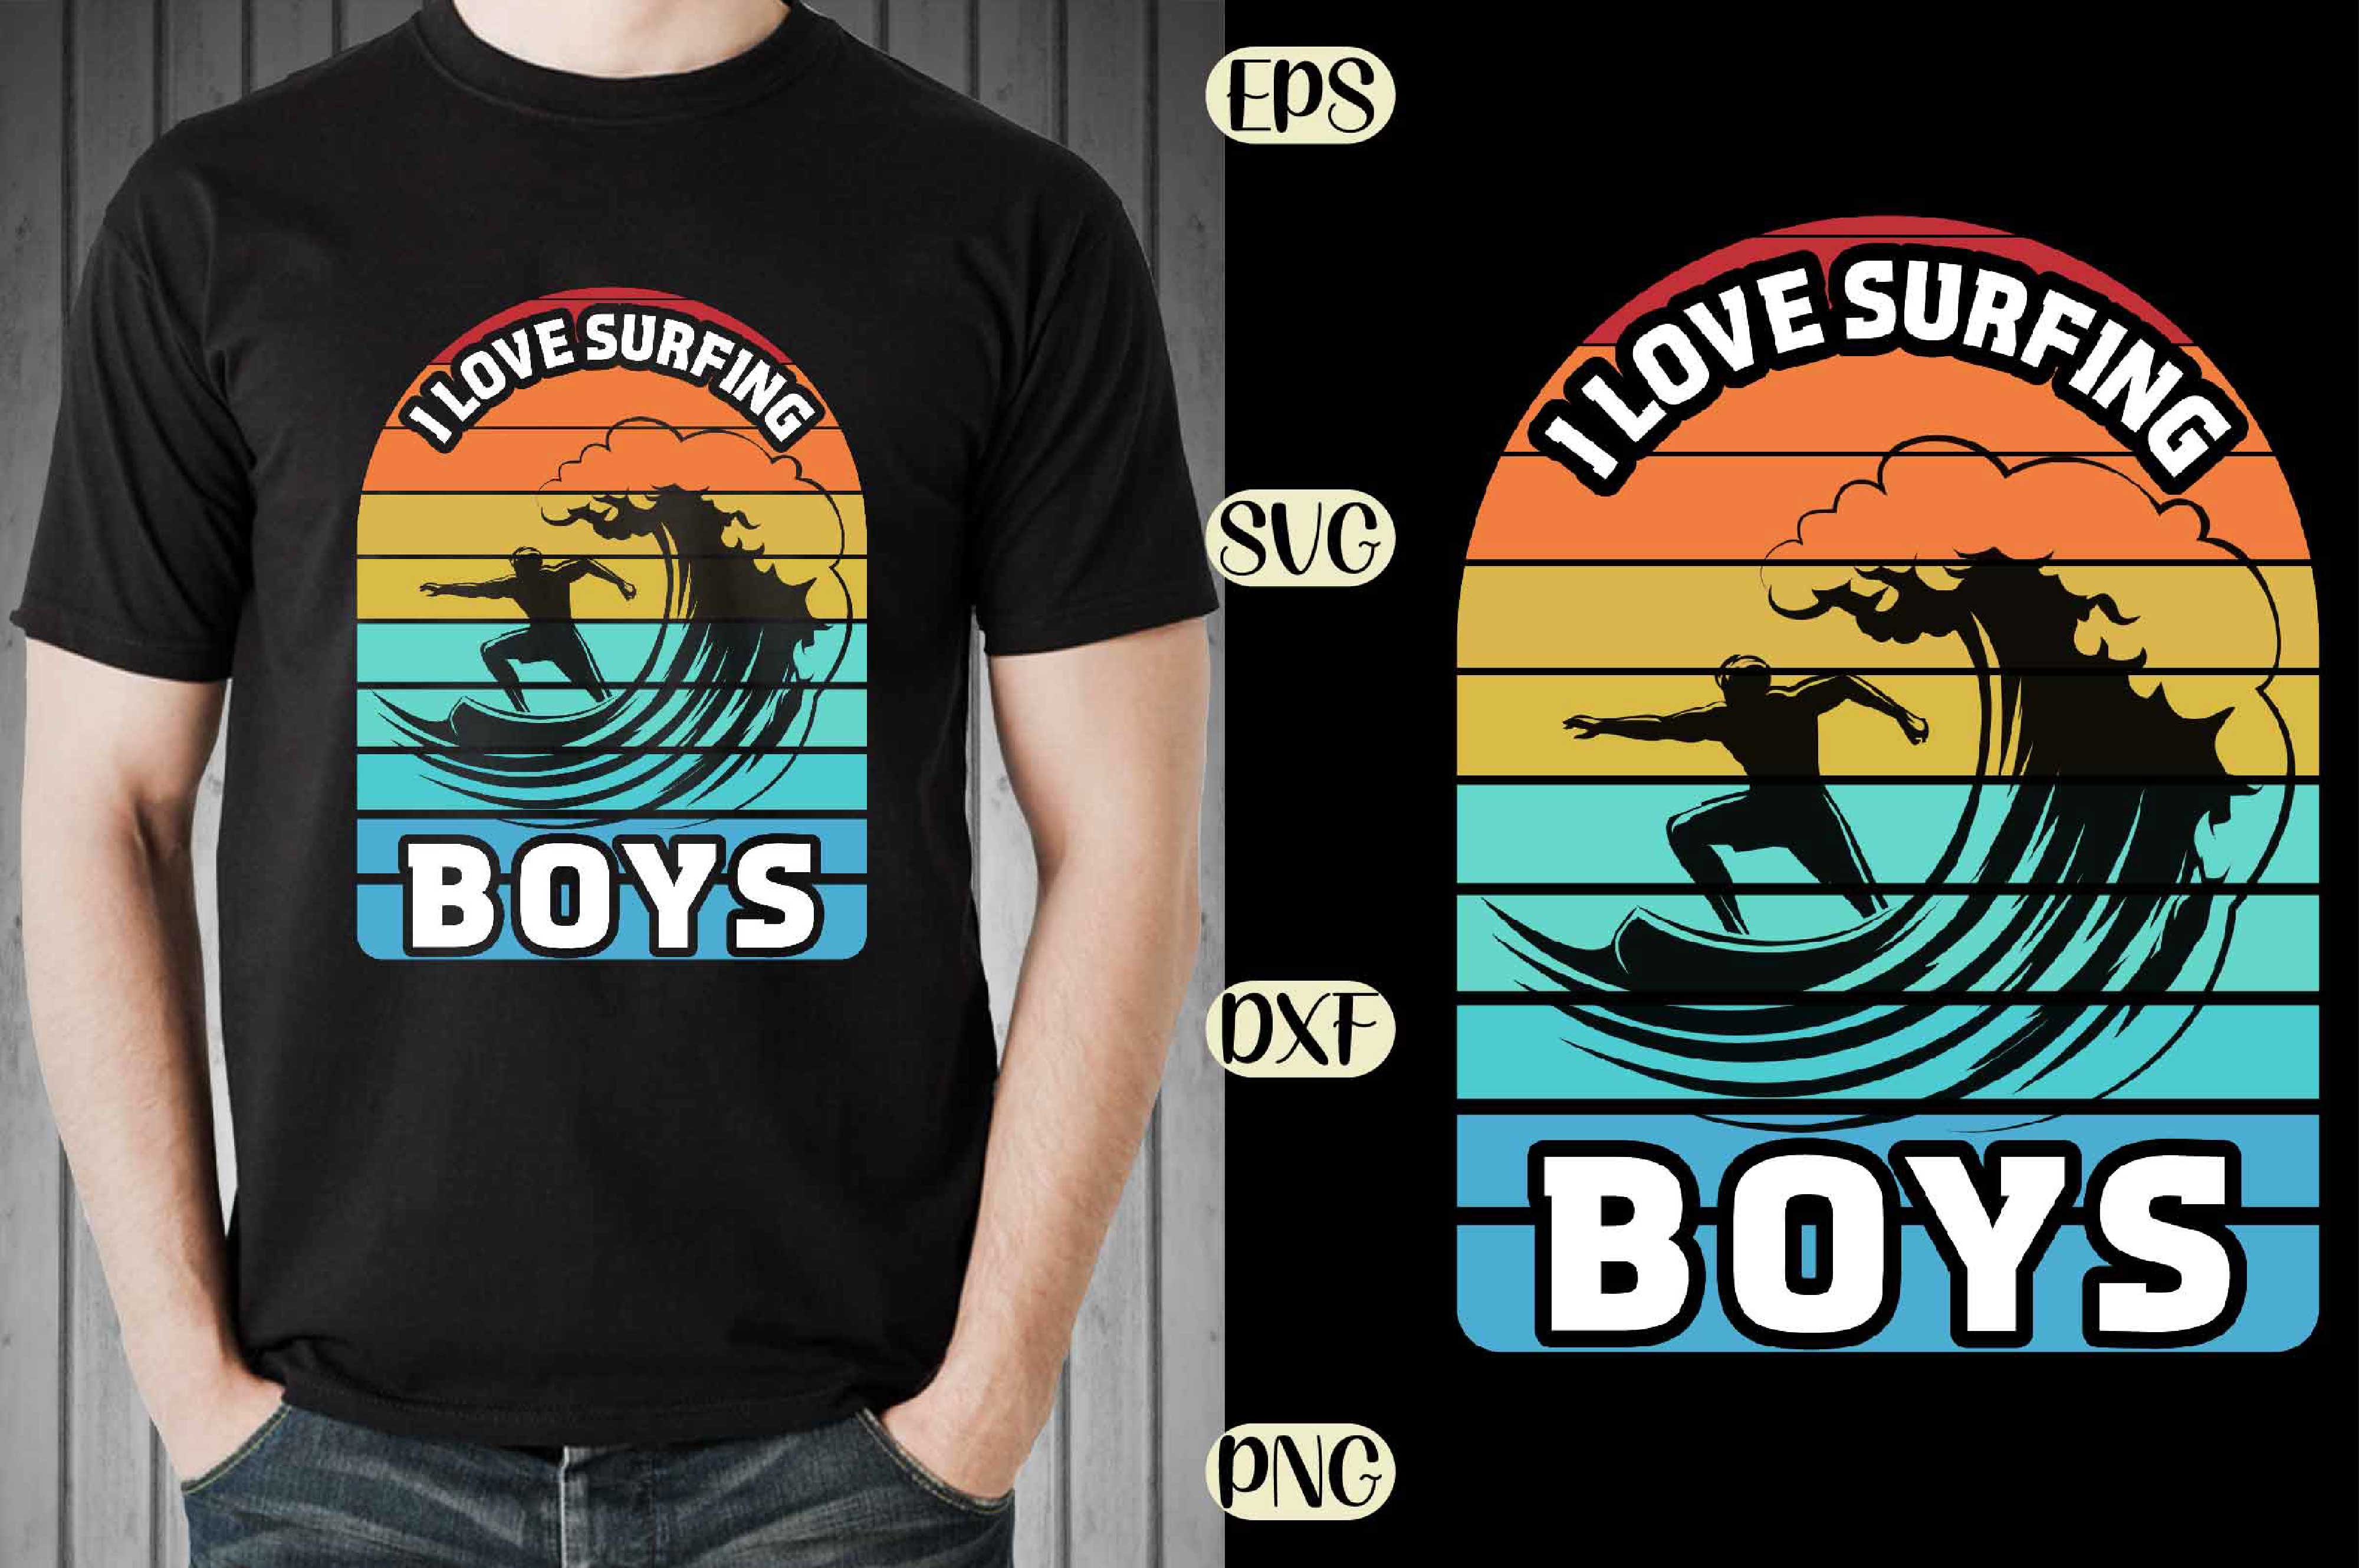 Man wearing a t - shirt that says i love surfing boys.